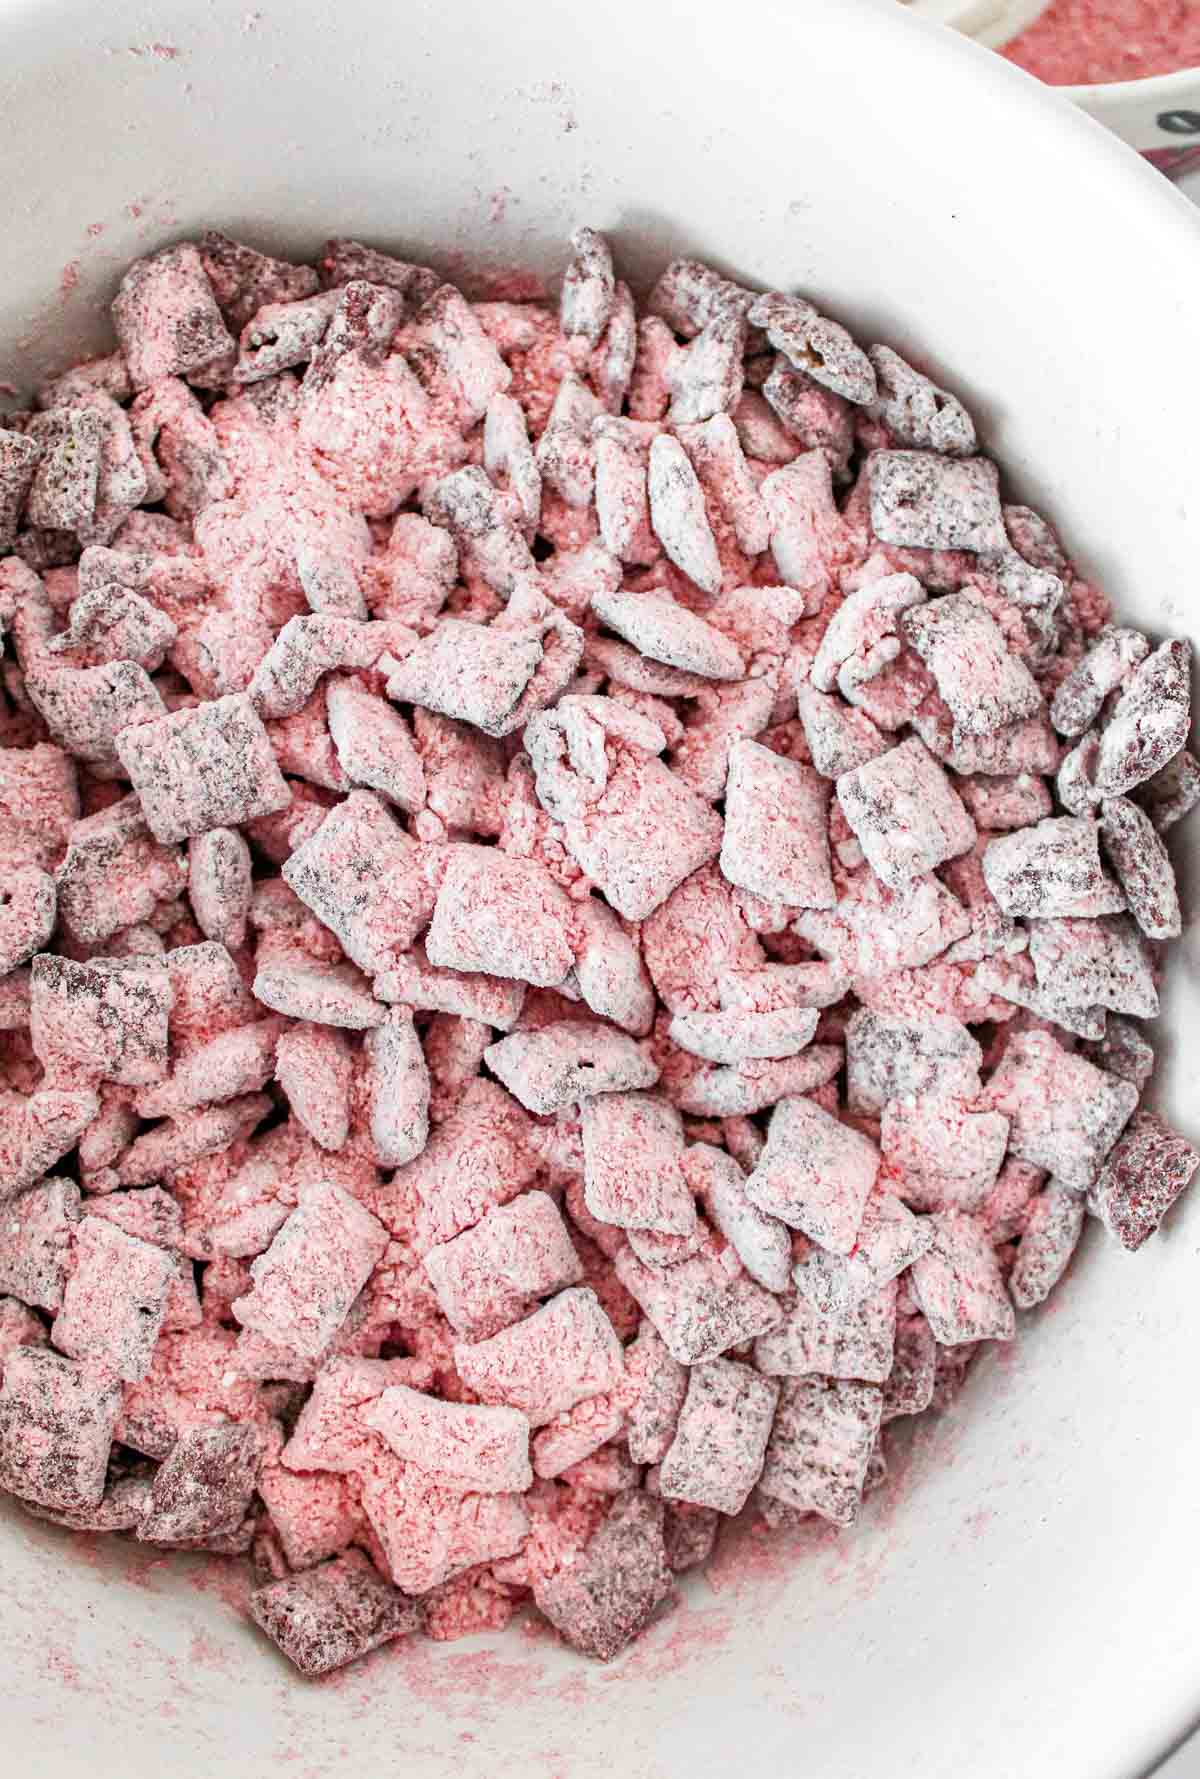 A bowl full of chocolate covered chex mix with pink strawberry flavored powdered sugar.